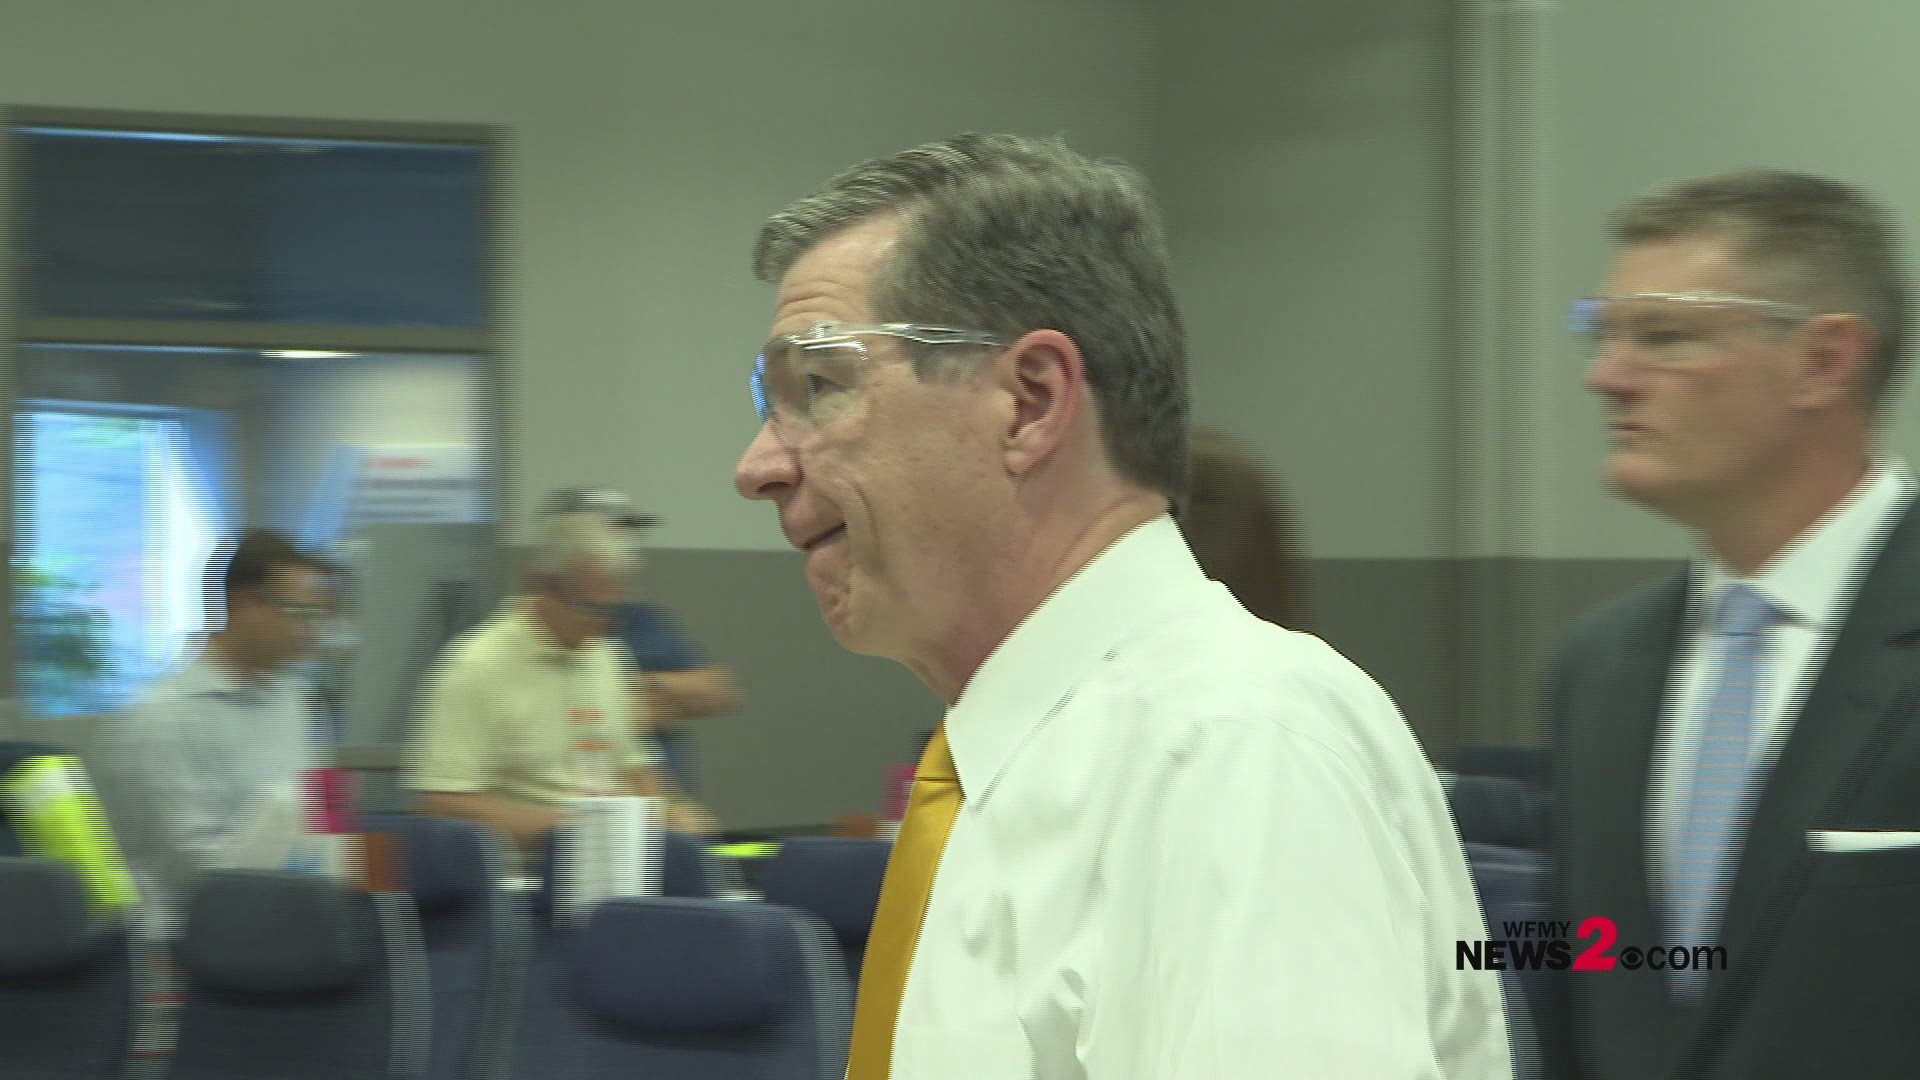 NC Governor Roy Cooper tours Collins Aerospace as part of his Manufacturing Month in NC. The company is located in Winston-Salem.